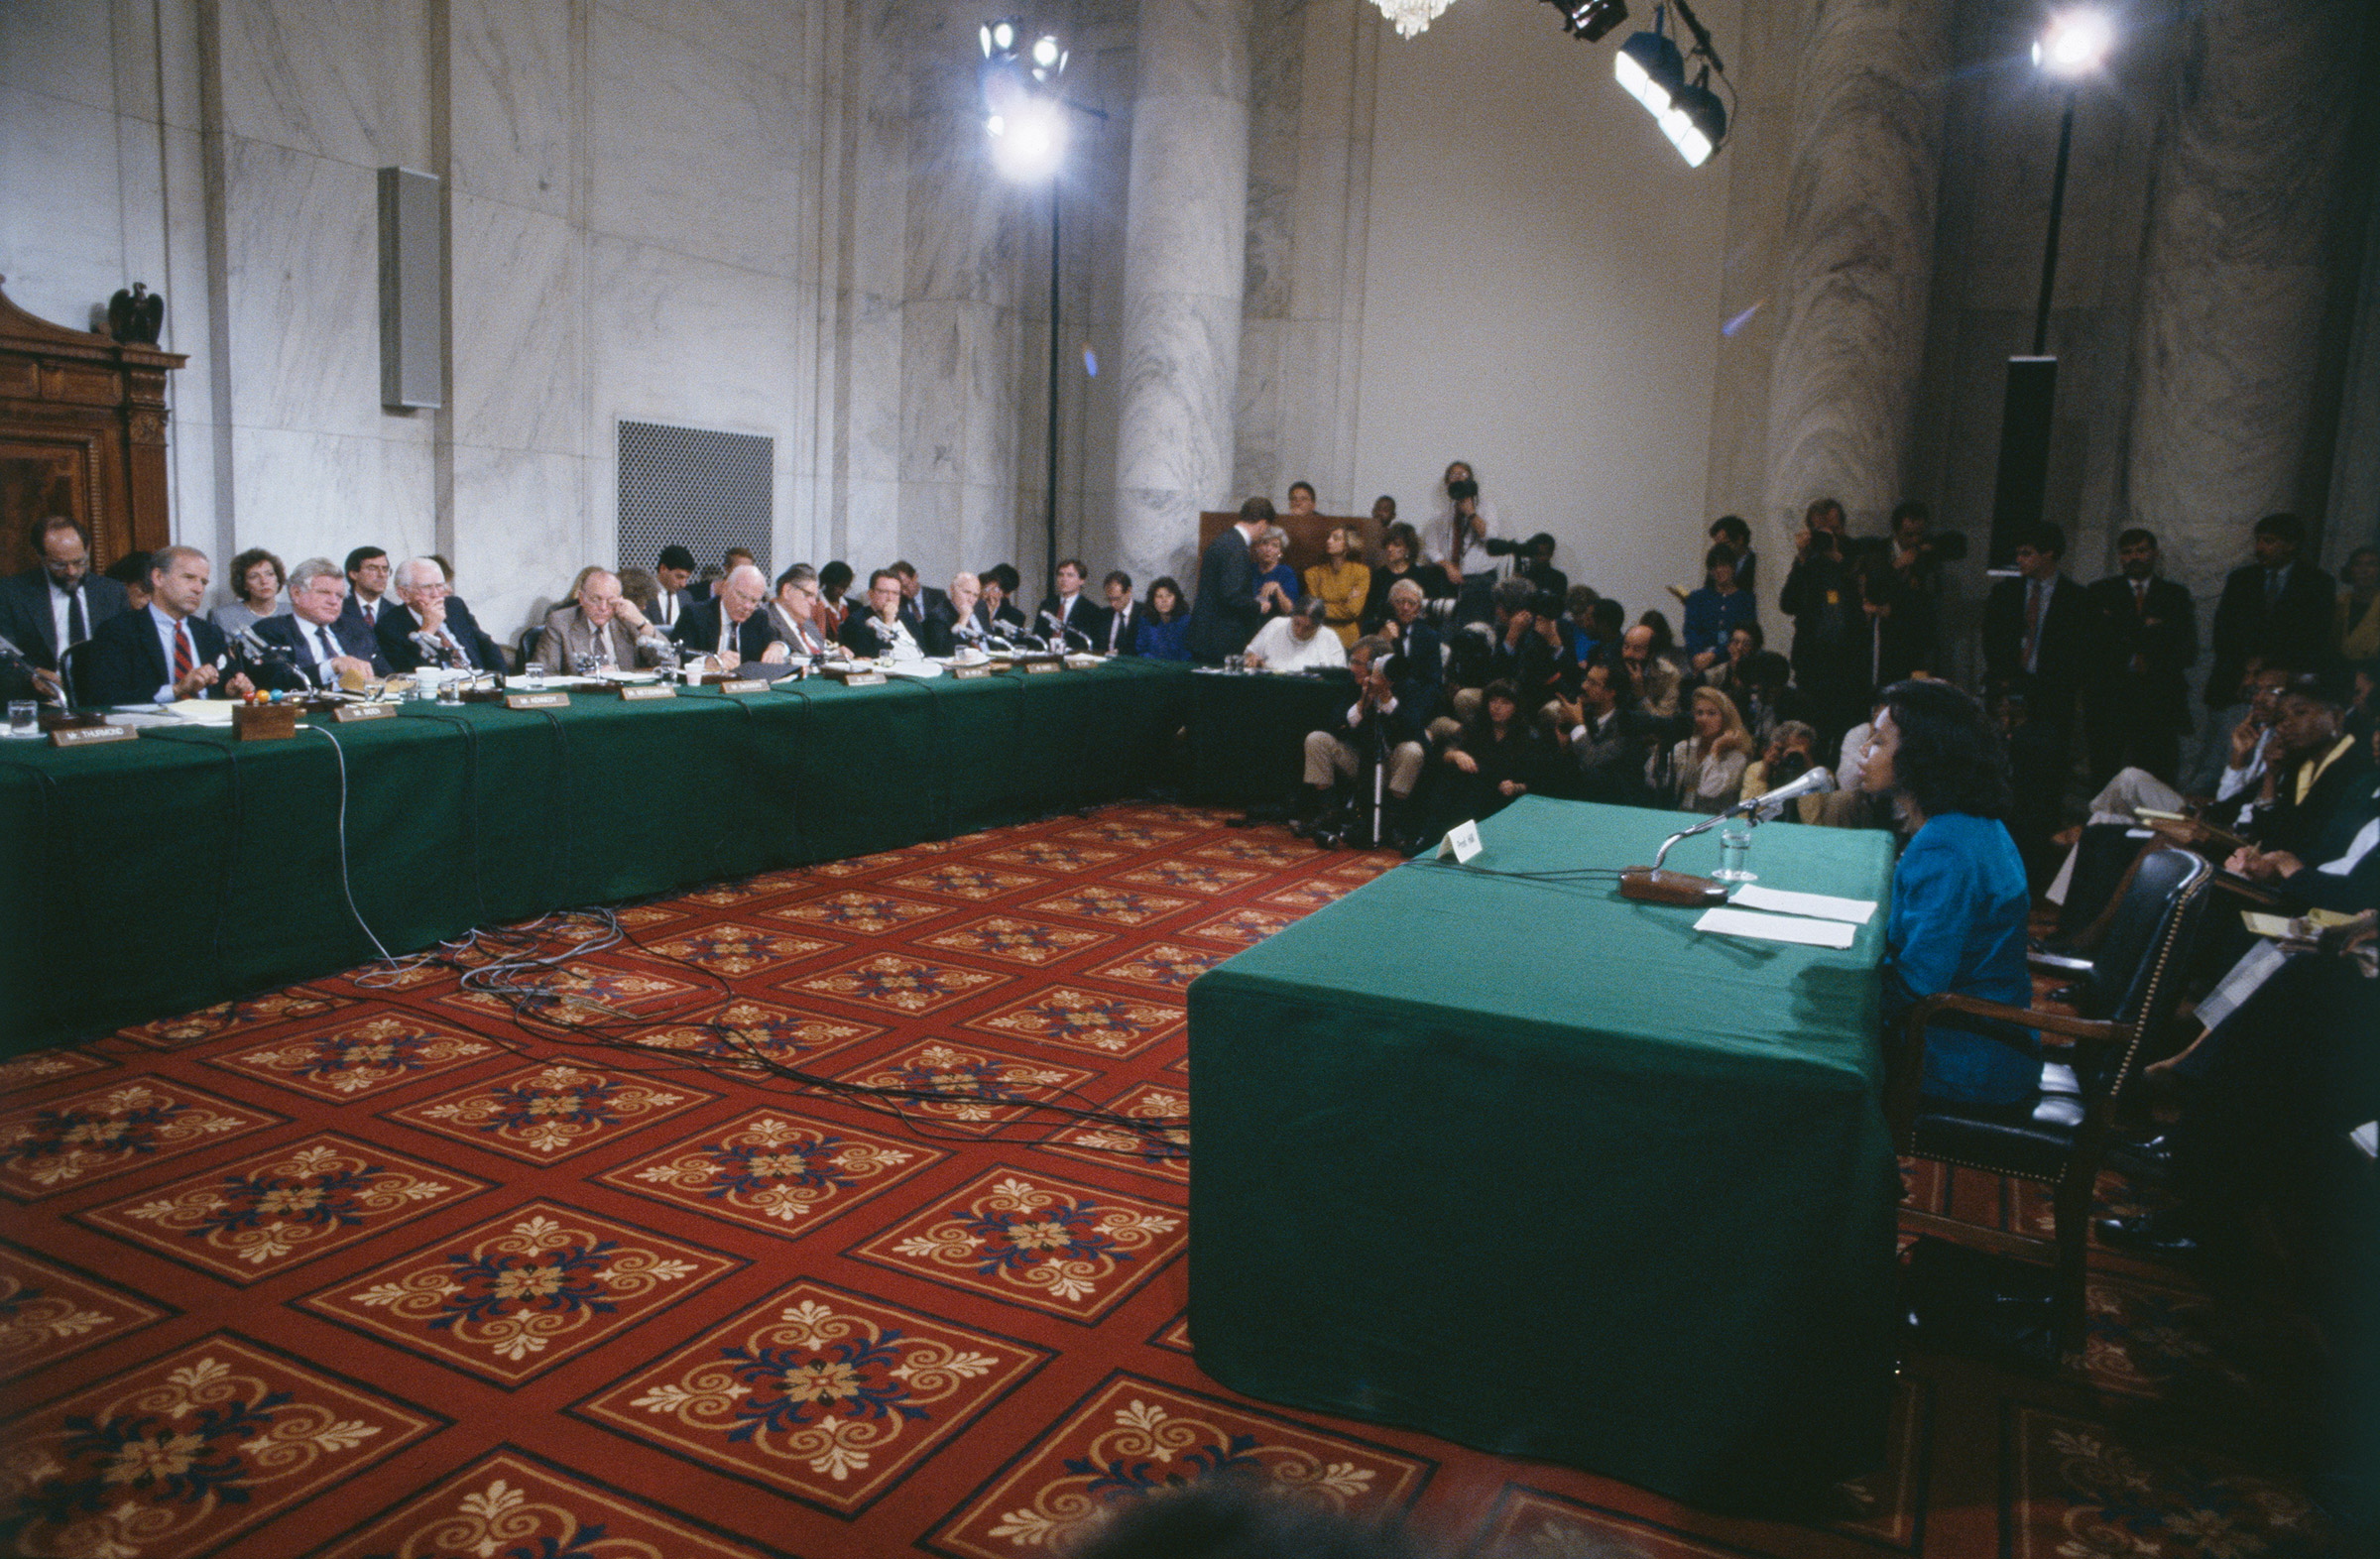 Anita Hill testifies before the Senate Judiciary Committee, chaired by Joe Biden, on the nomination of Clarence Thomas to the Supreme Court on Capitol Hill in Washington, D.C., on Oct. 11, 1991.